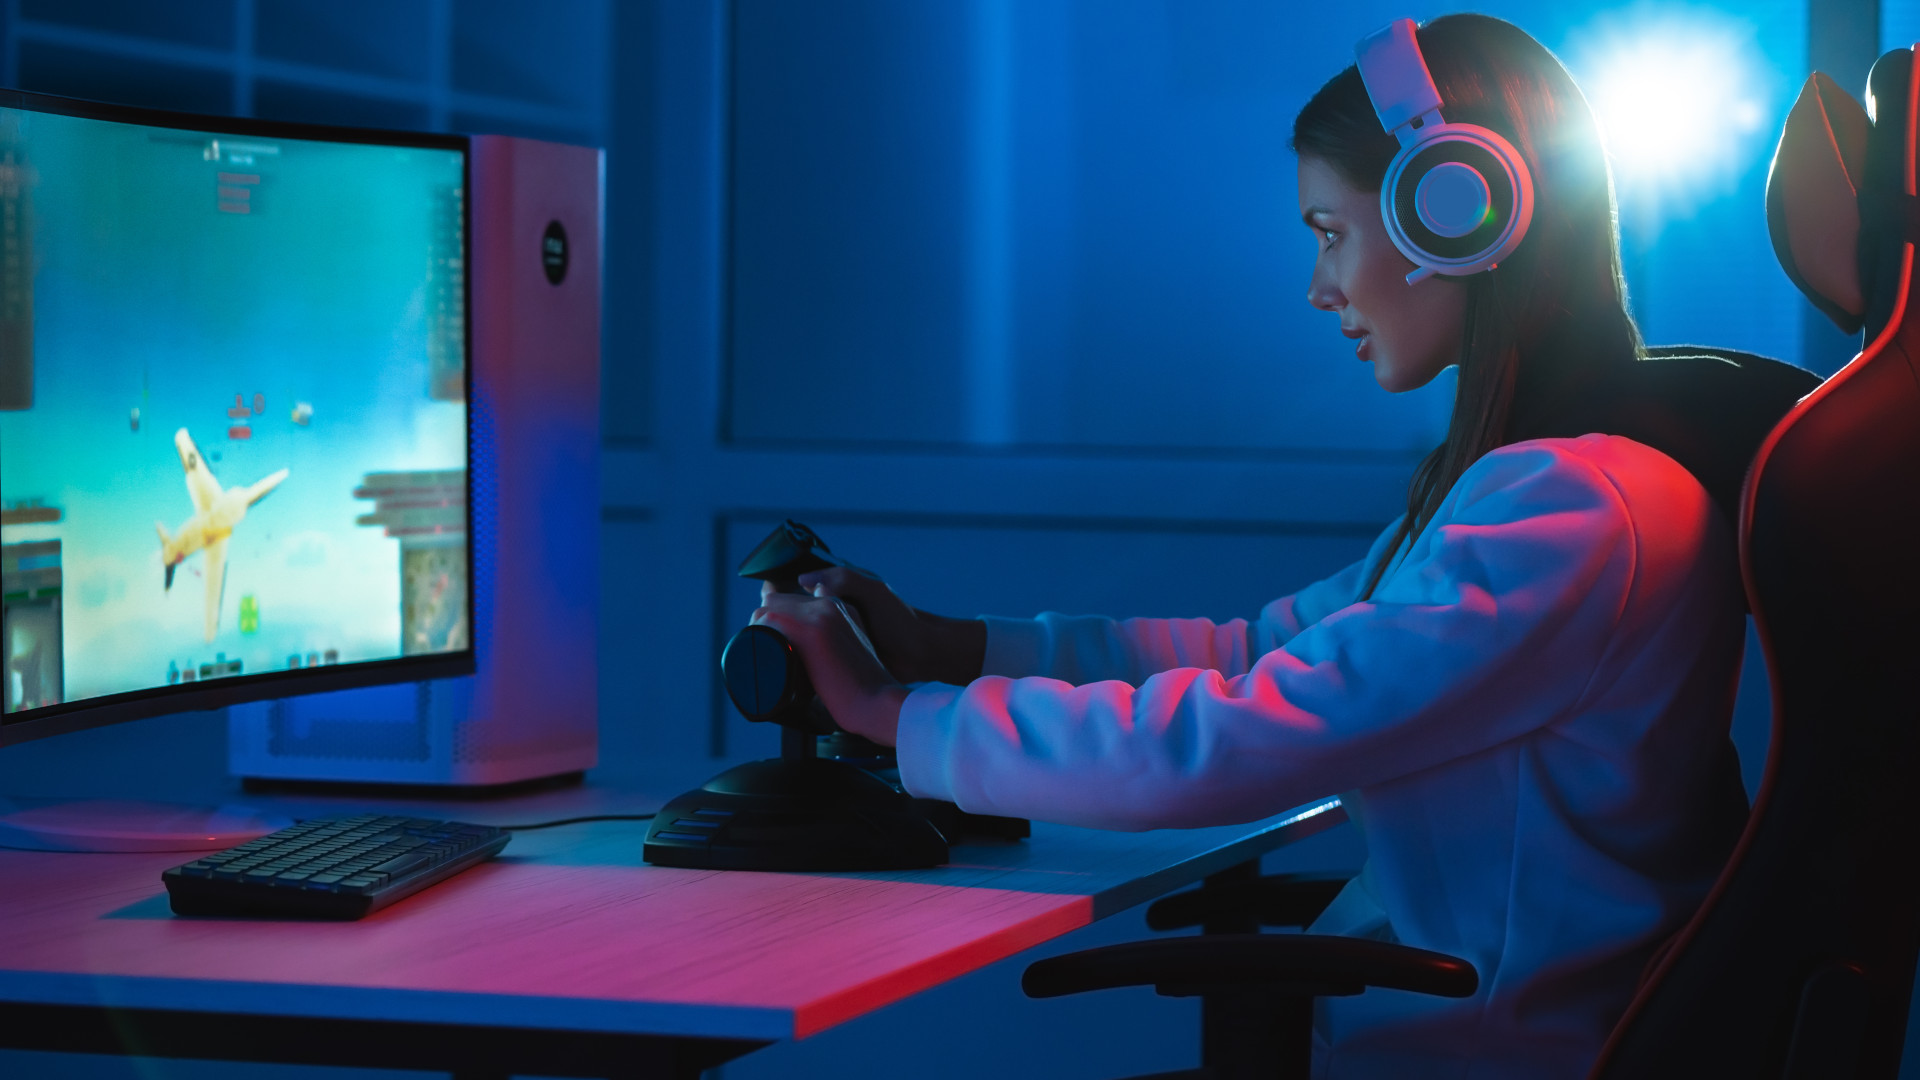 A woman playing a flight simulation game on her gaming PC